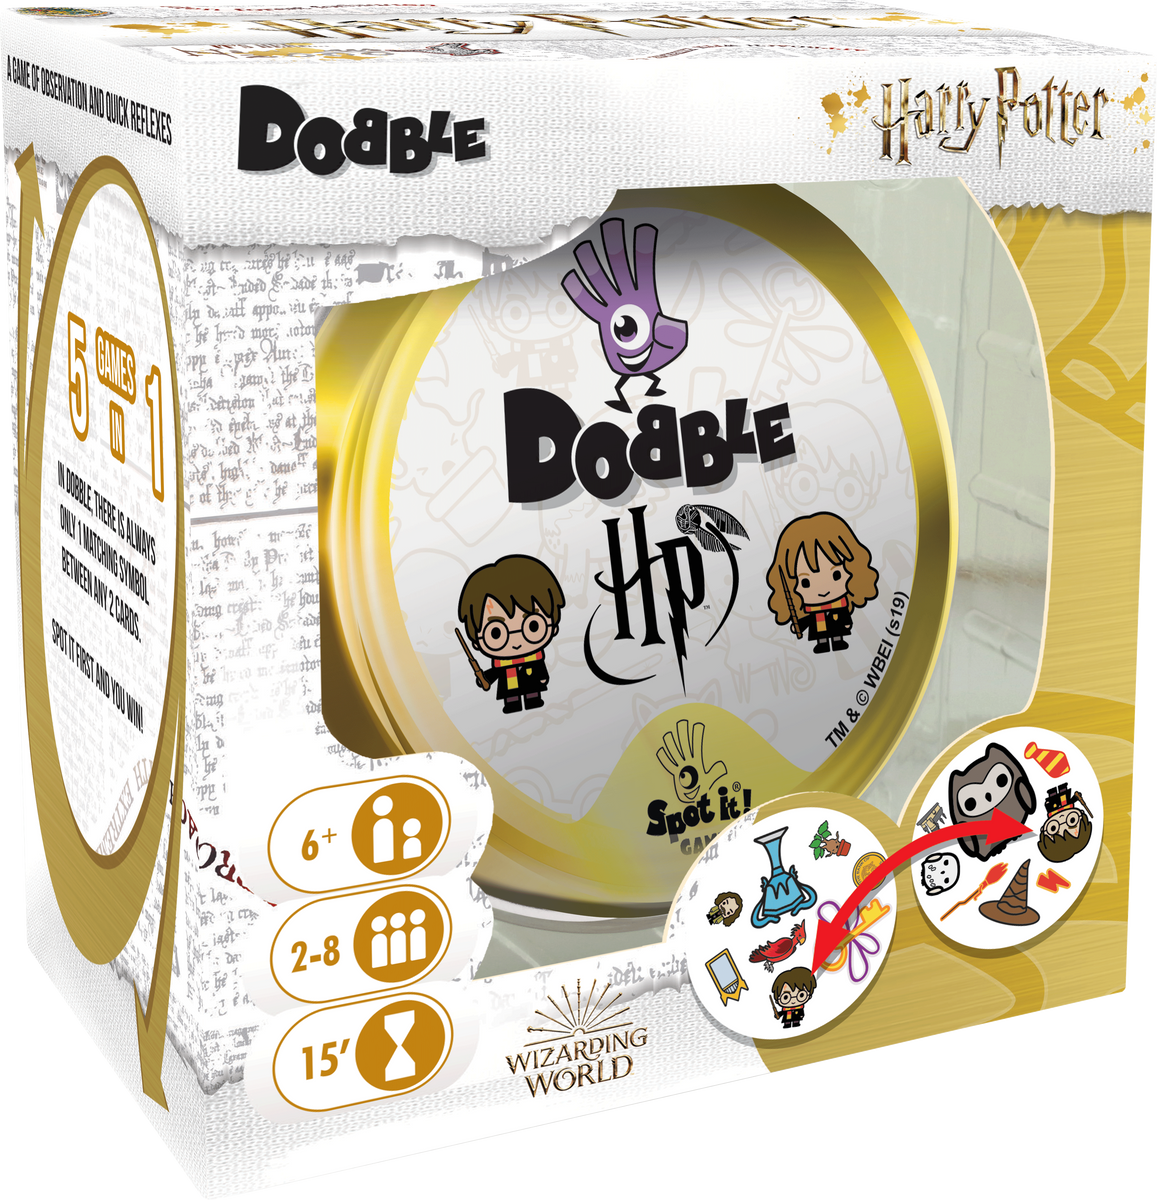 Harry Potter Dobble - Blogger Board Game Club Review - A Little